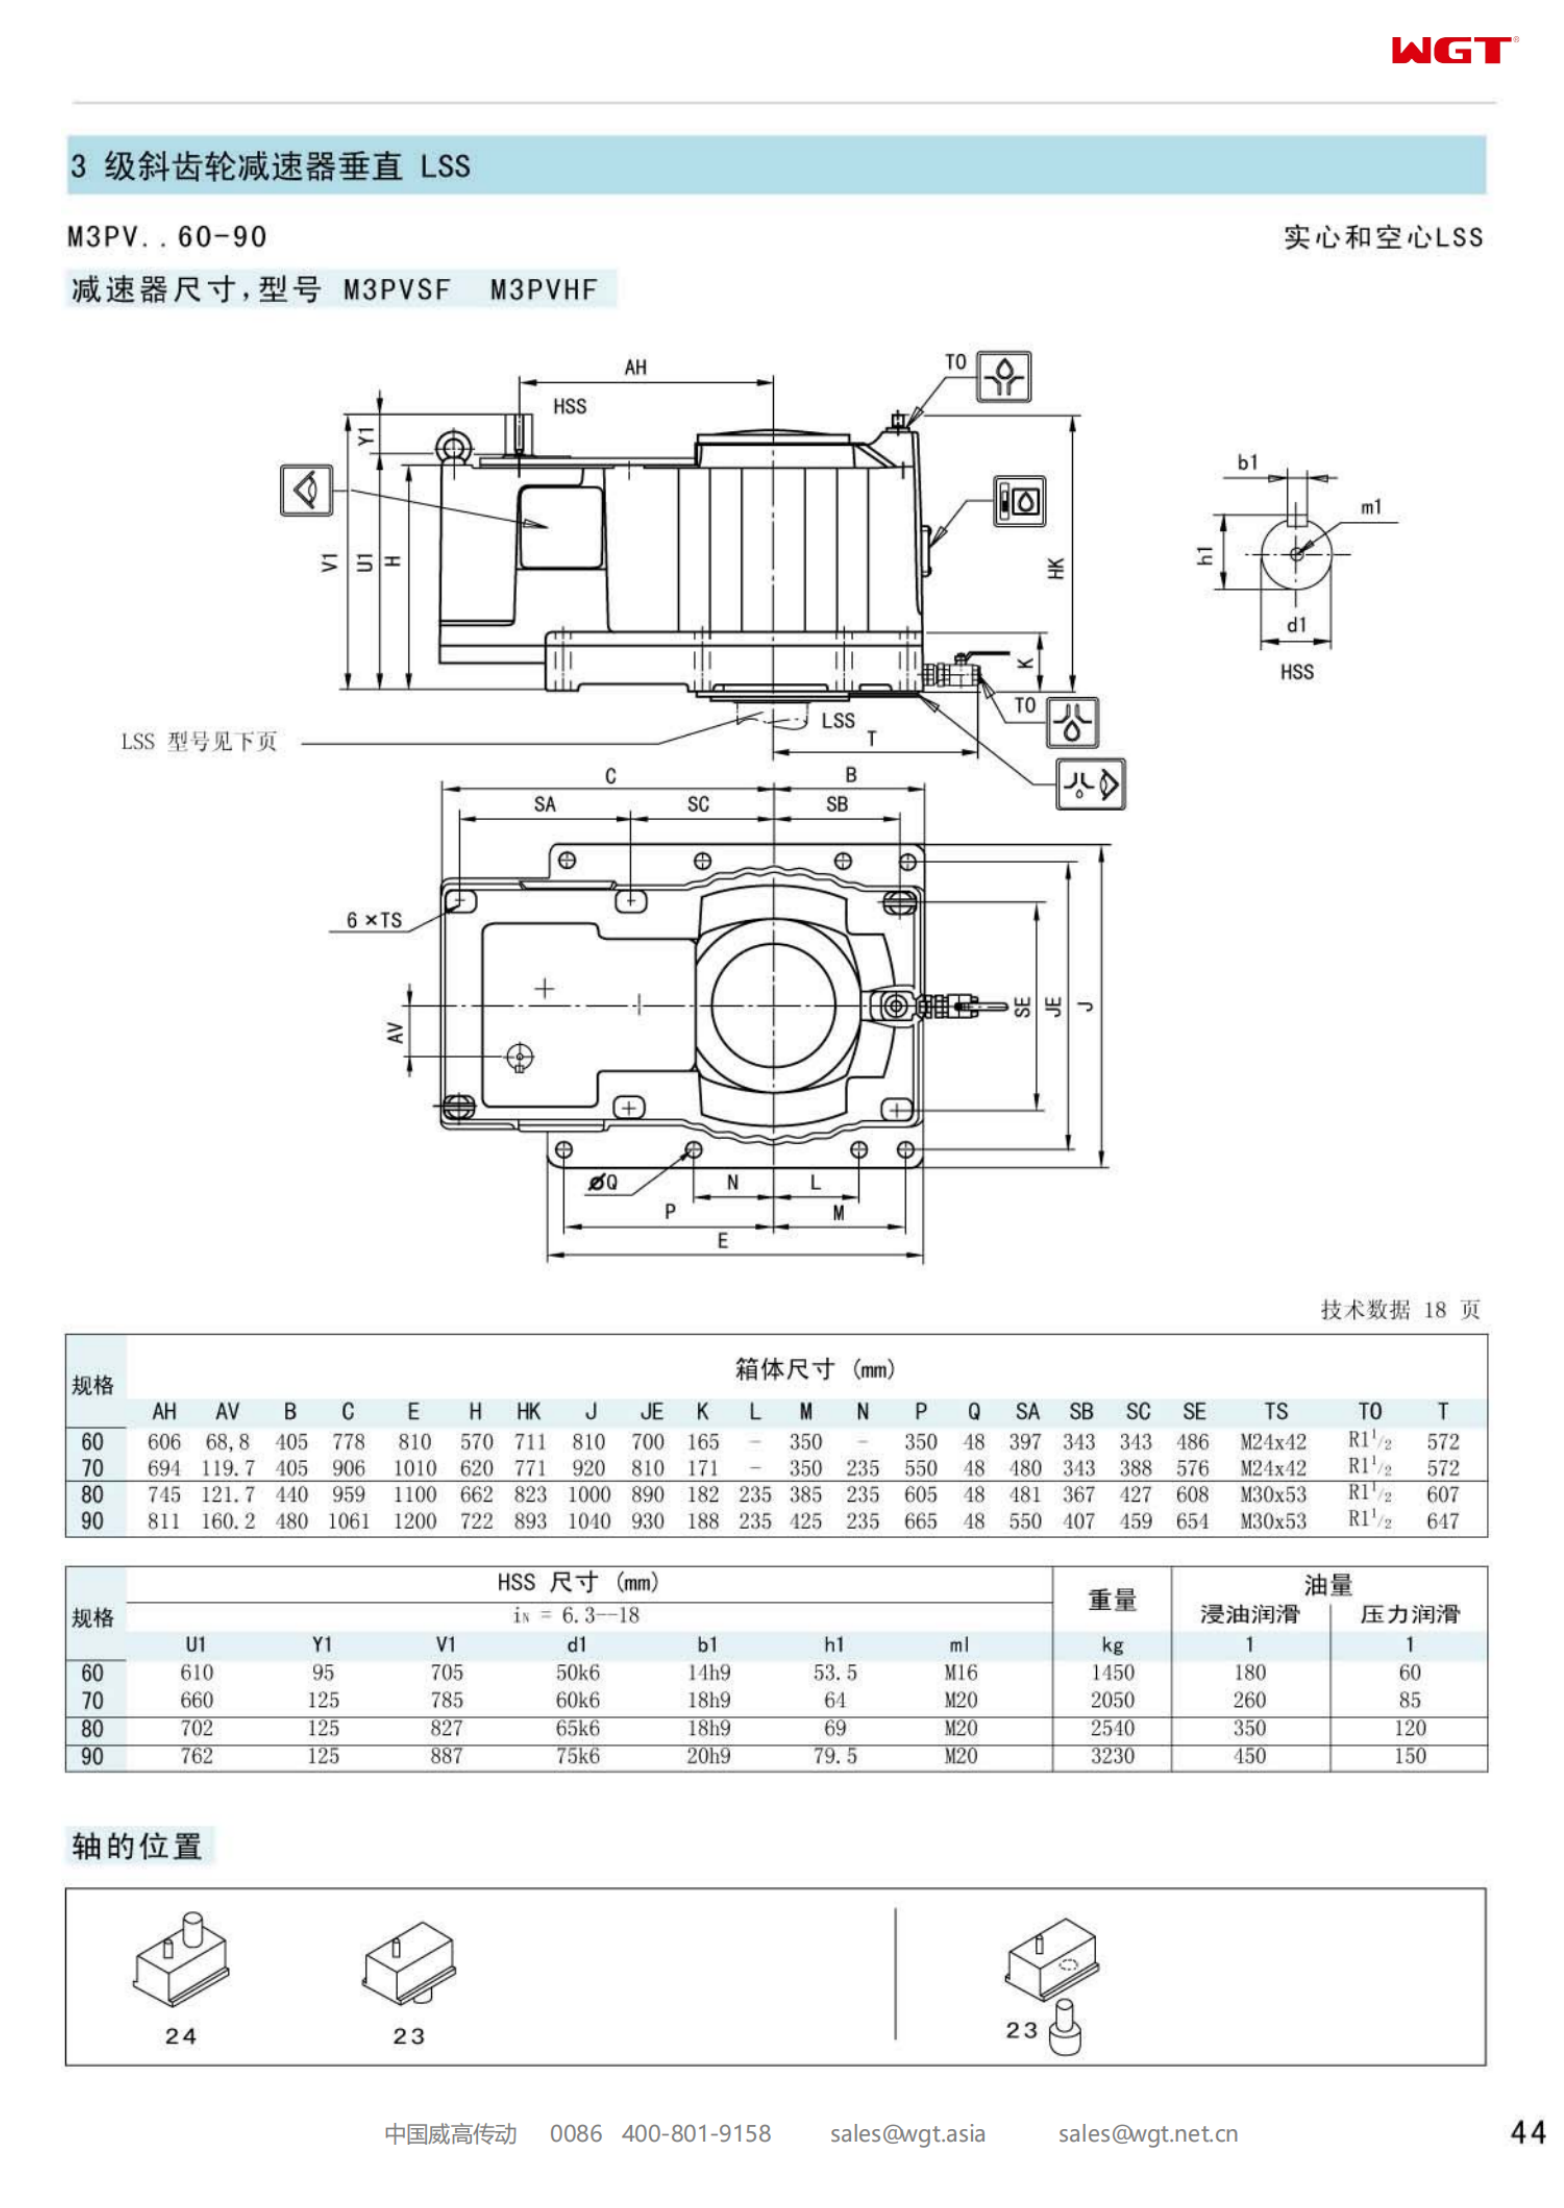 M3PVHF70 Replace_SEW_M_Series Gearbox